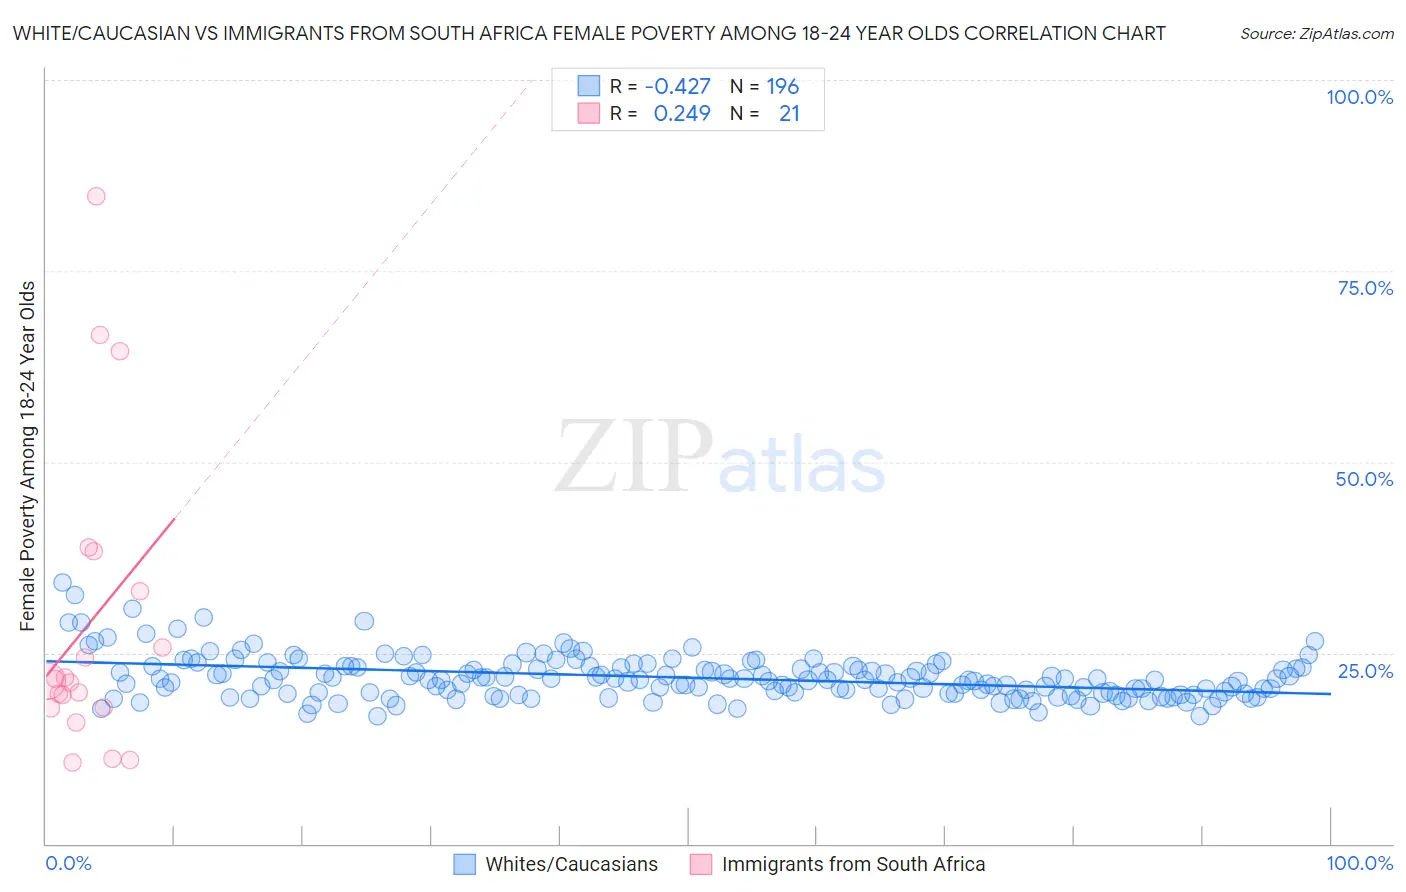 White/Caucasian vs Immigrants from South Africa Female Poverty Among 18-24 Year Olds